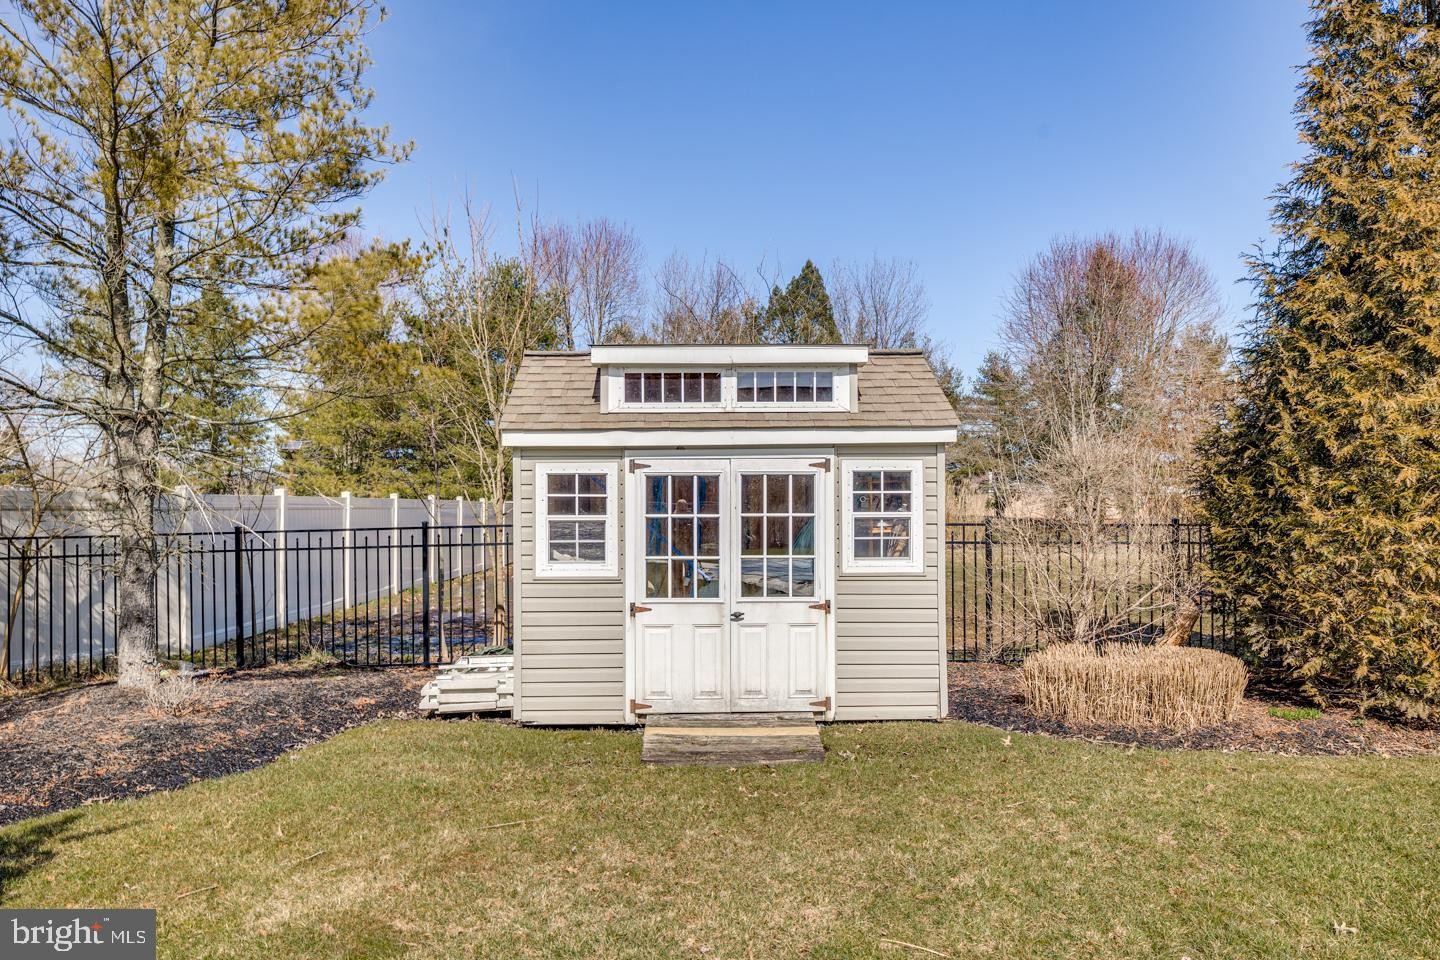 48. 3 Bellwether Ct